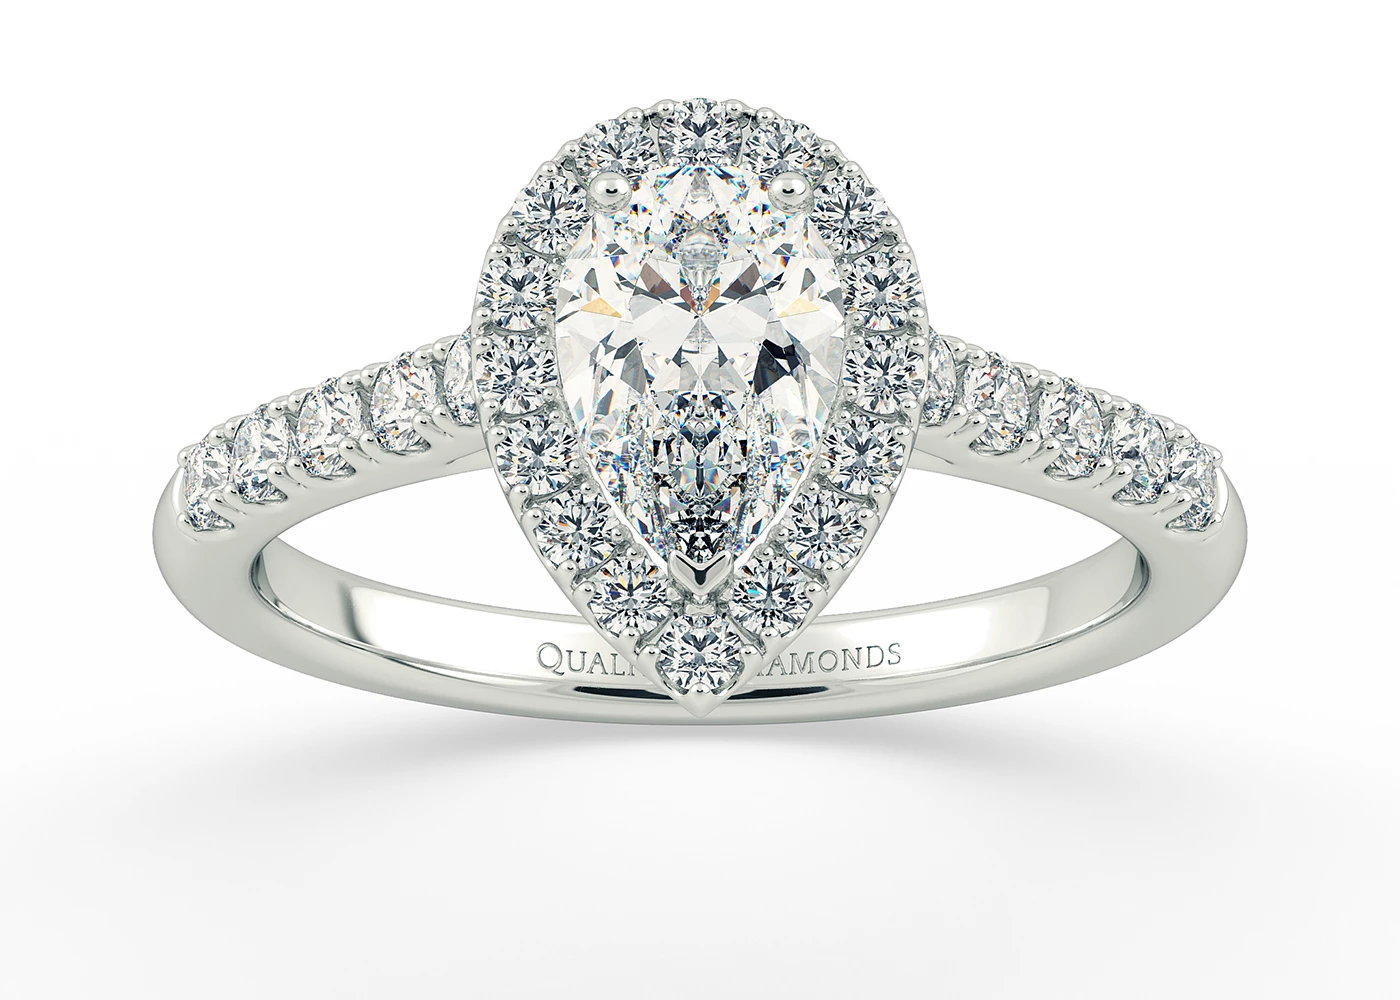 One Carat Pear Halo Diamond Ring in 9K White Gold